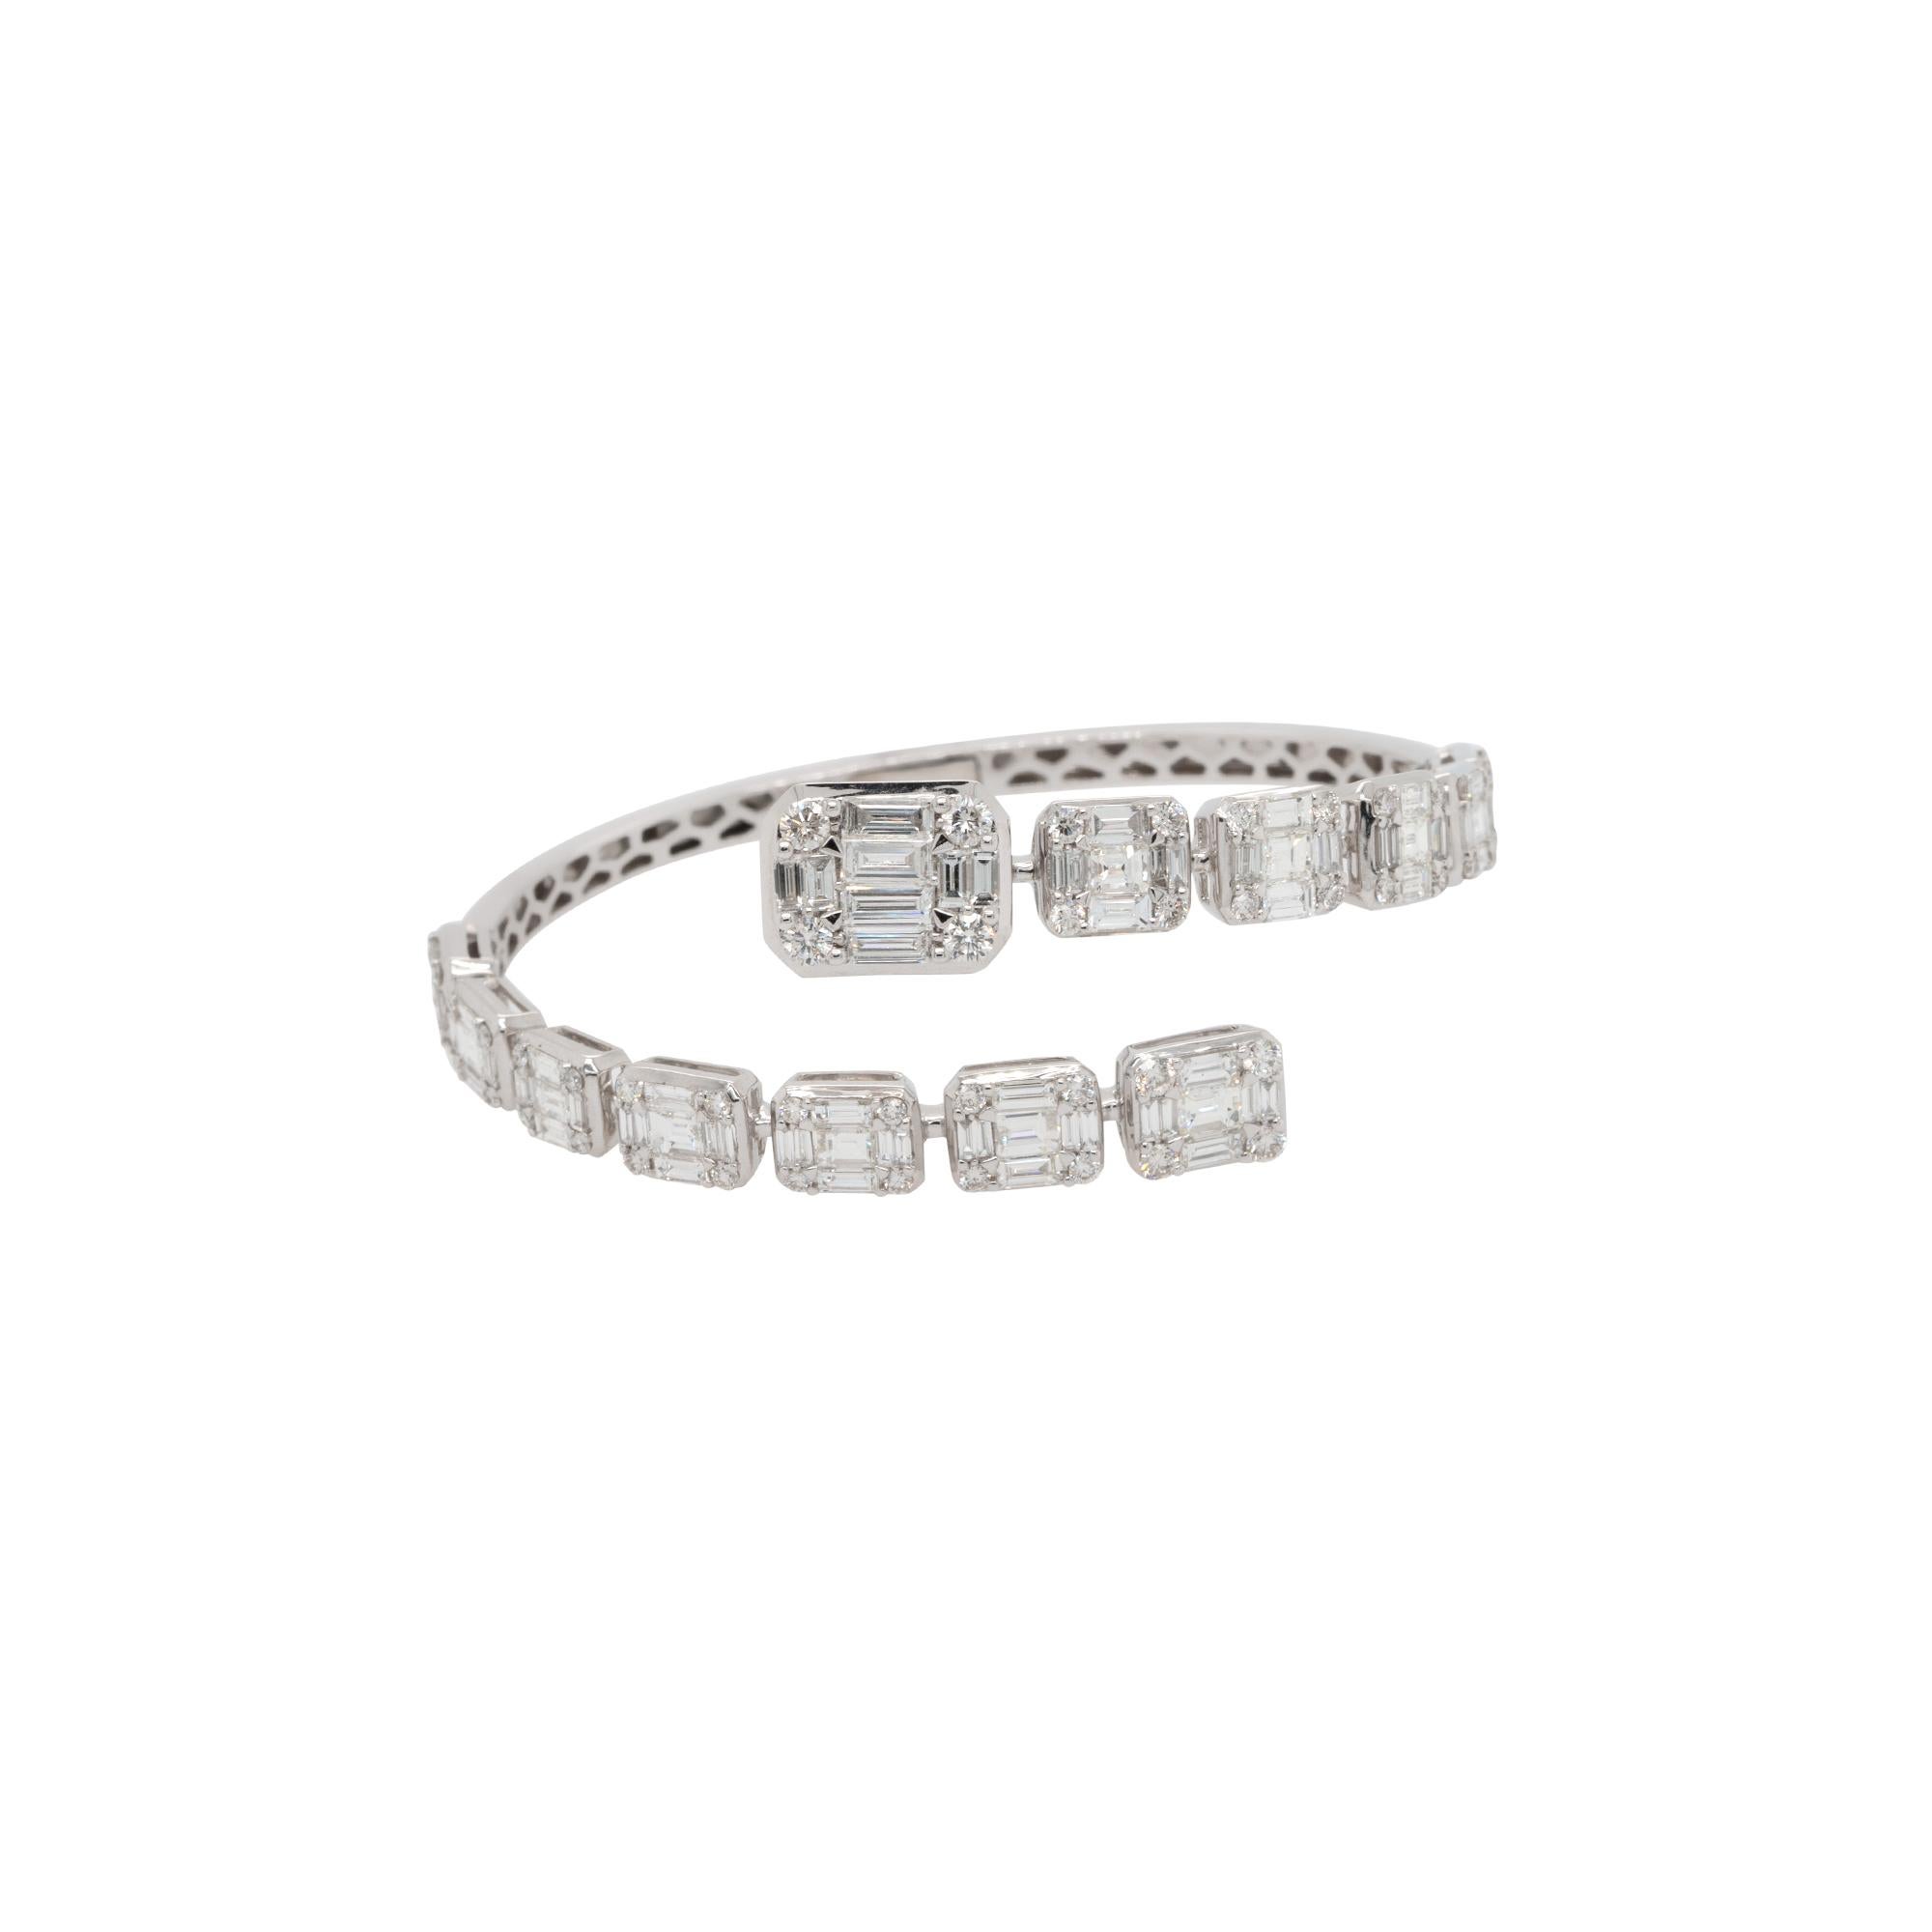 Material: 18k White Gold

Diamond Details: 
5.72ctw of baguette cut natural Diamonds. Diamonds are G/H in color and VS in clarity
1.49ctw of round cut natural Diamonds. Diamonds are G/H in color and VS in clarity

Measurements: 64mm x 25mm x